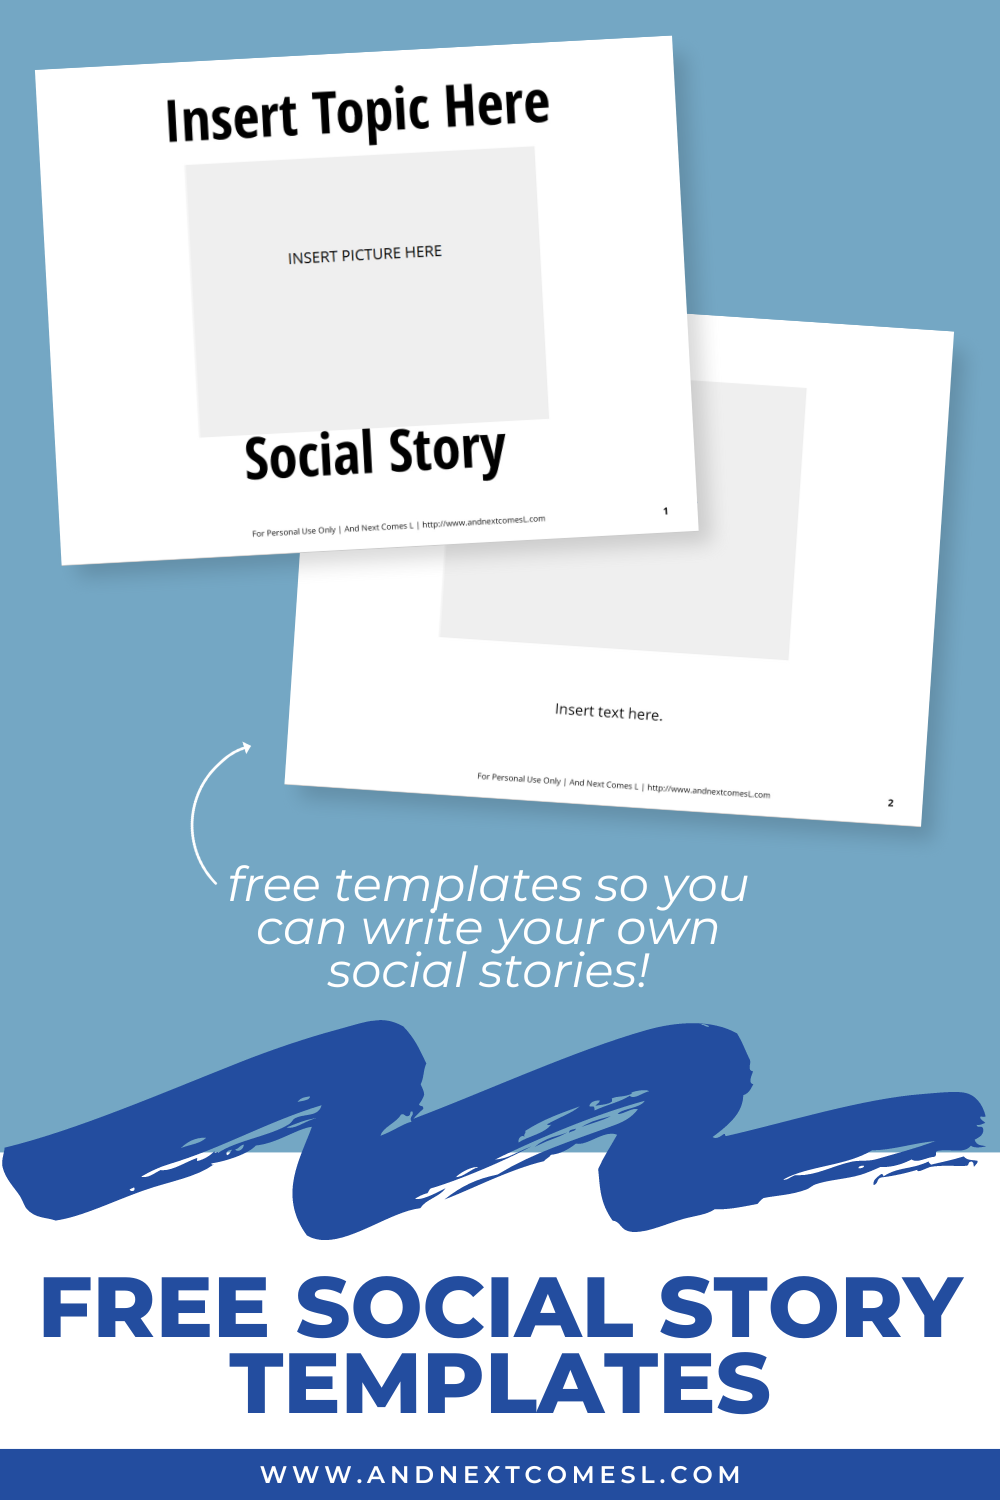 Use these free social story templates to write your own social stories for kids